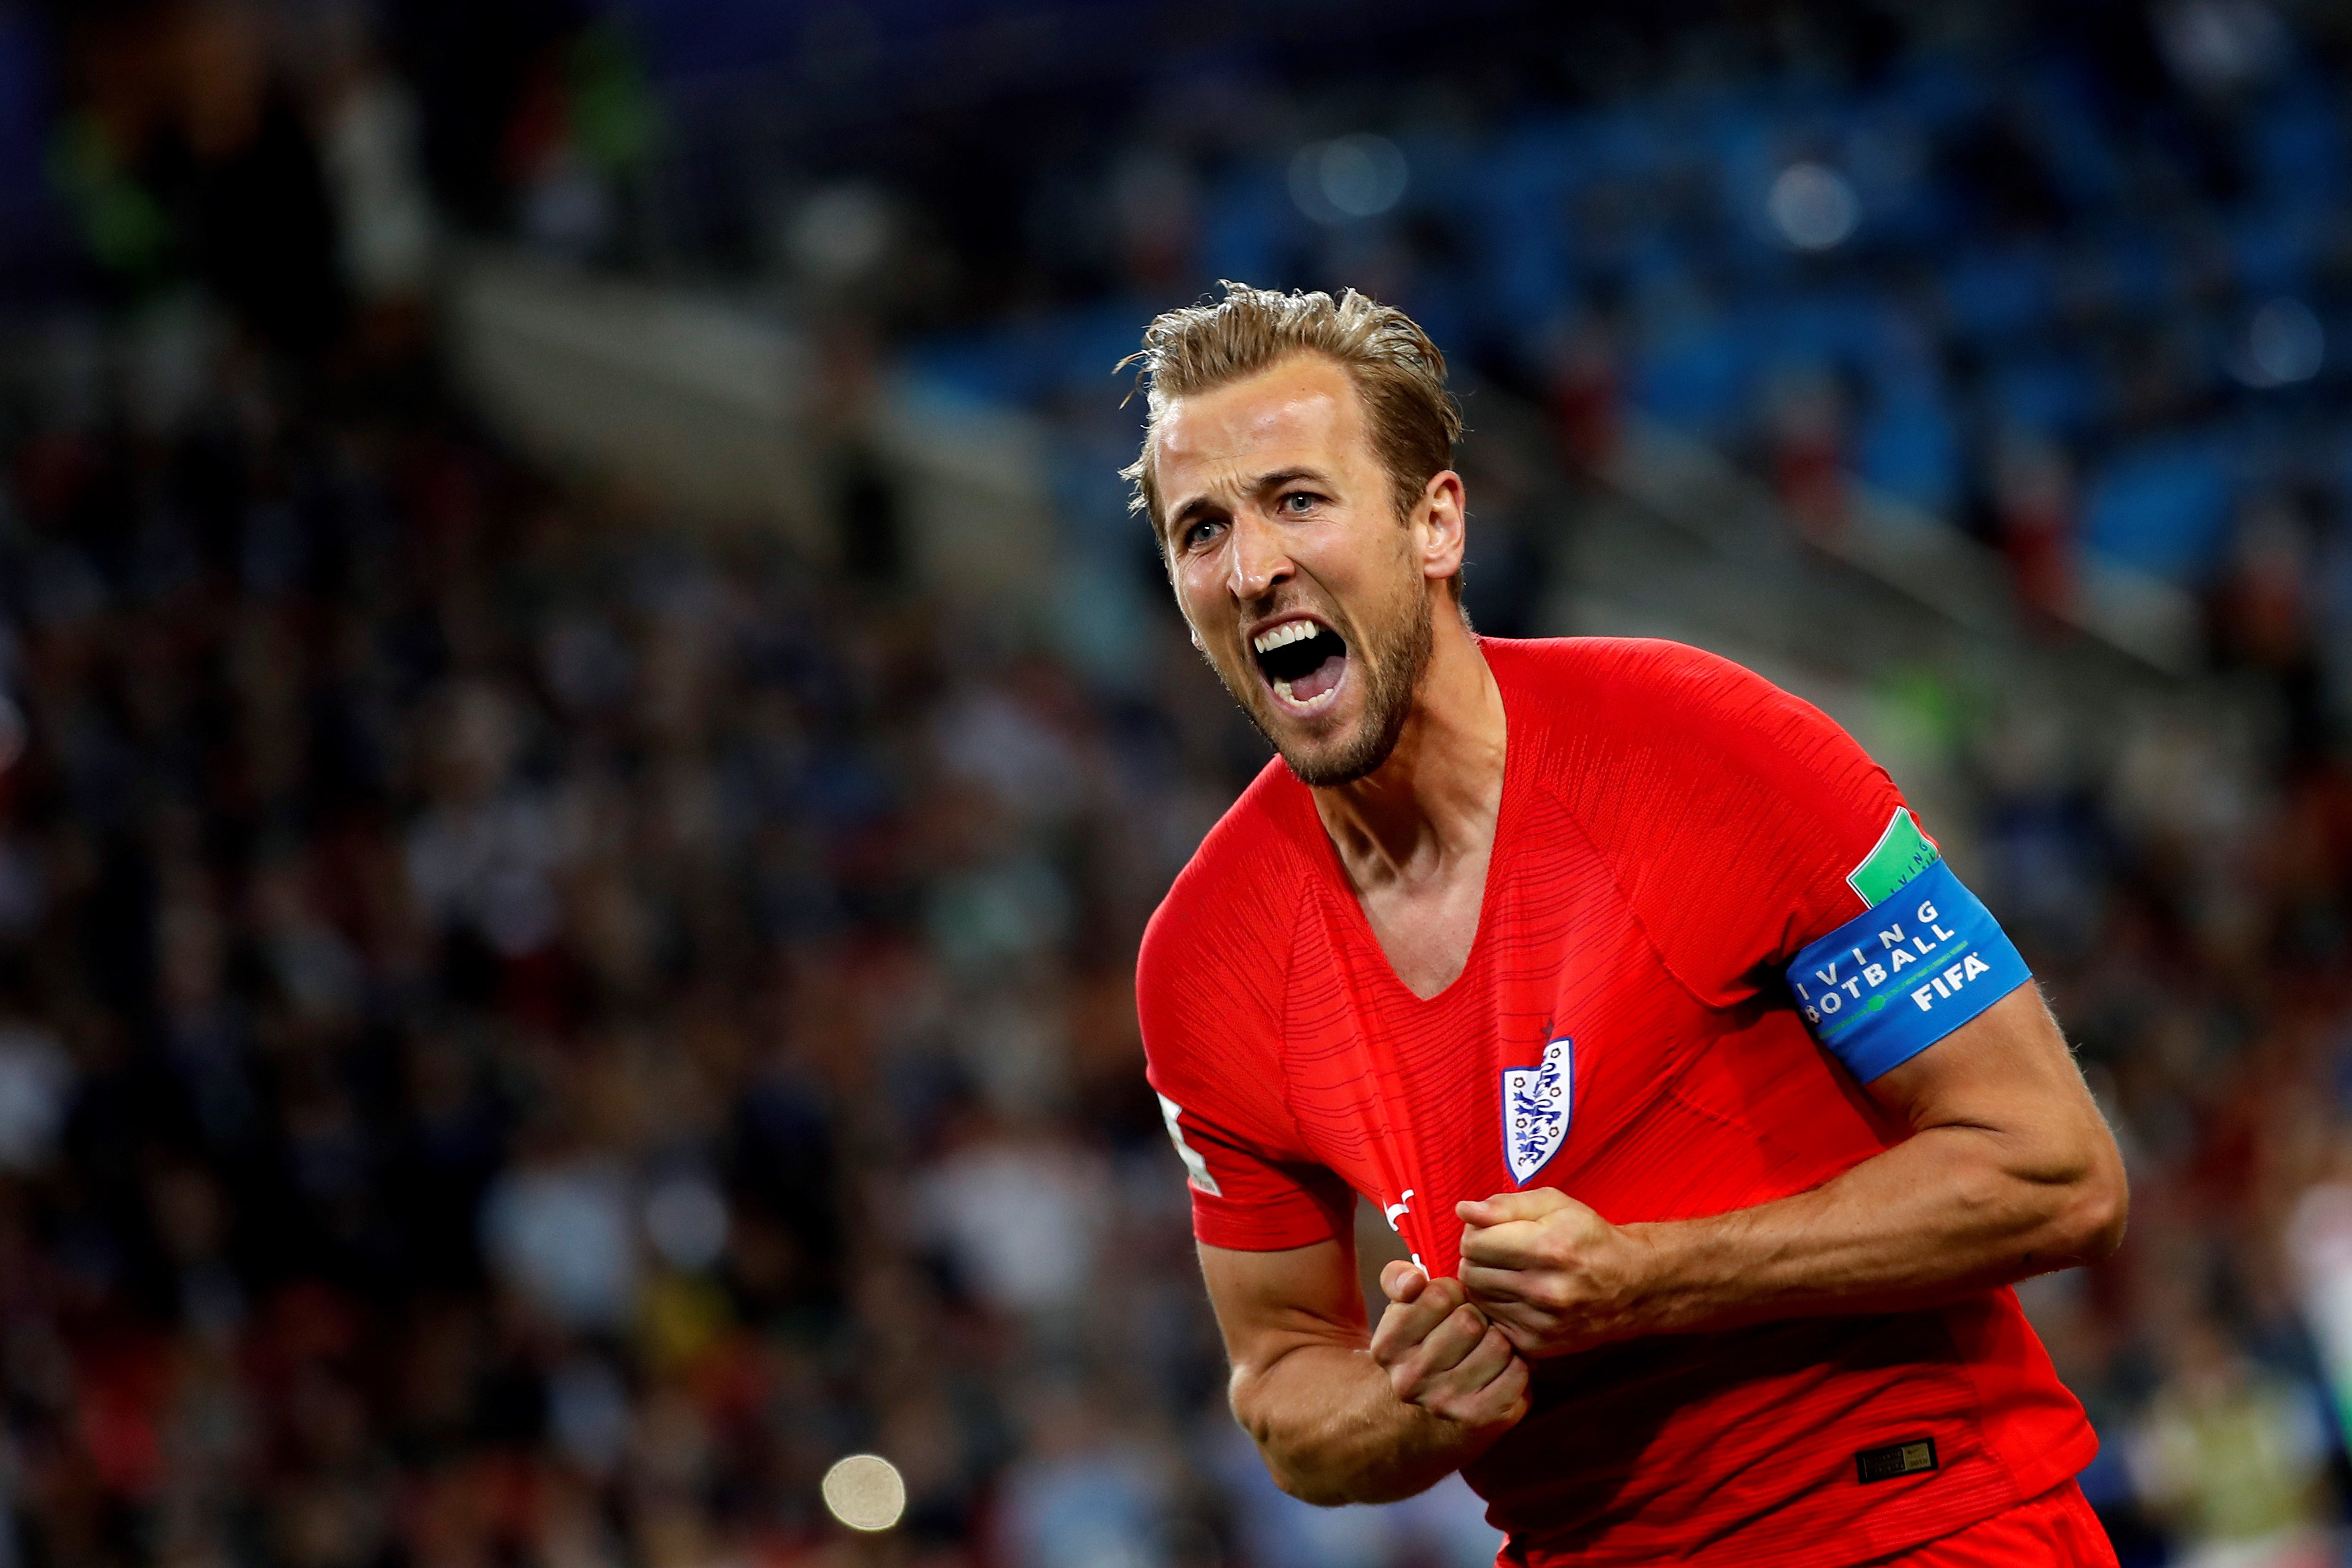 Harry Kane of England celebrates scoring in his team’s last-16 victory win against Colombia at the World Cup in Russia which ended with him finishing as top goalscorer and one of the tournament’s 10 best players. Photo: EPA-EFE